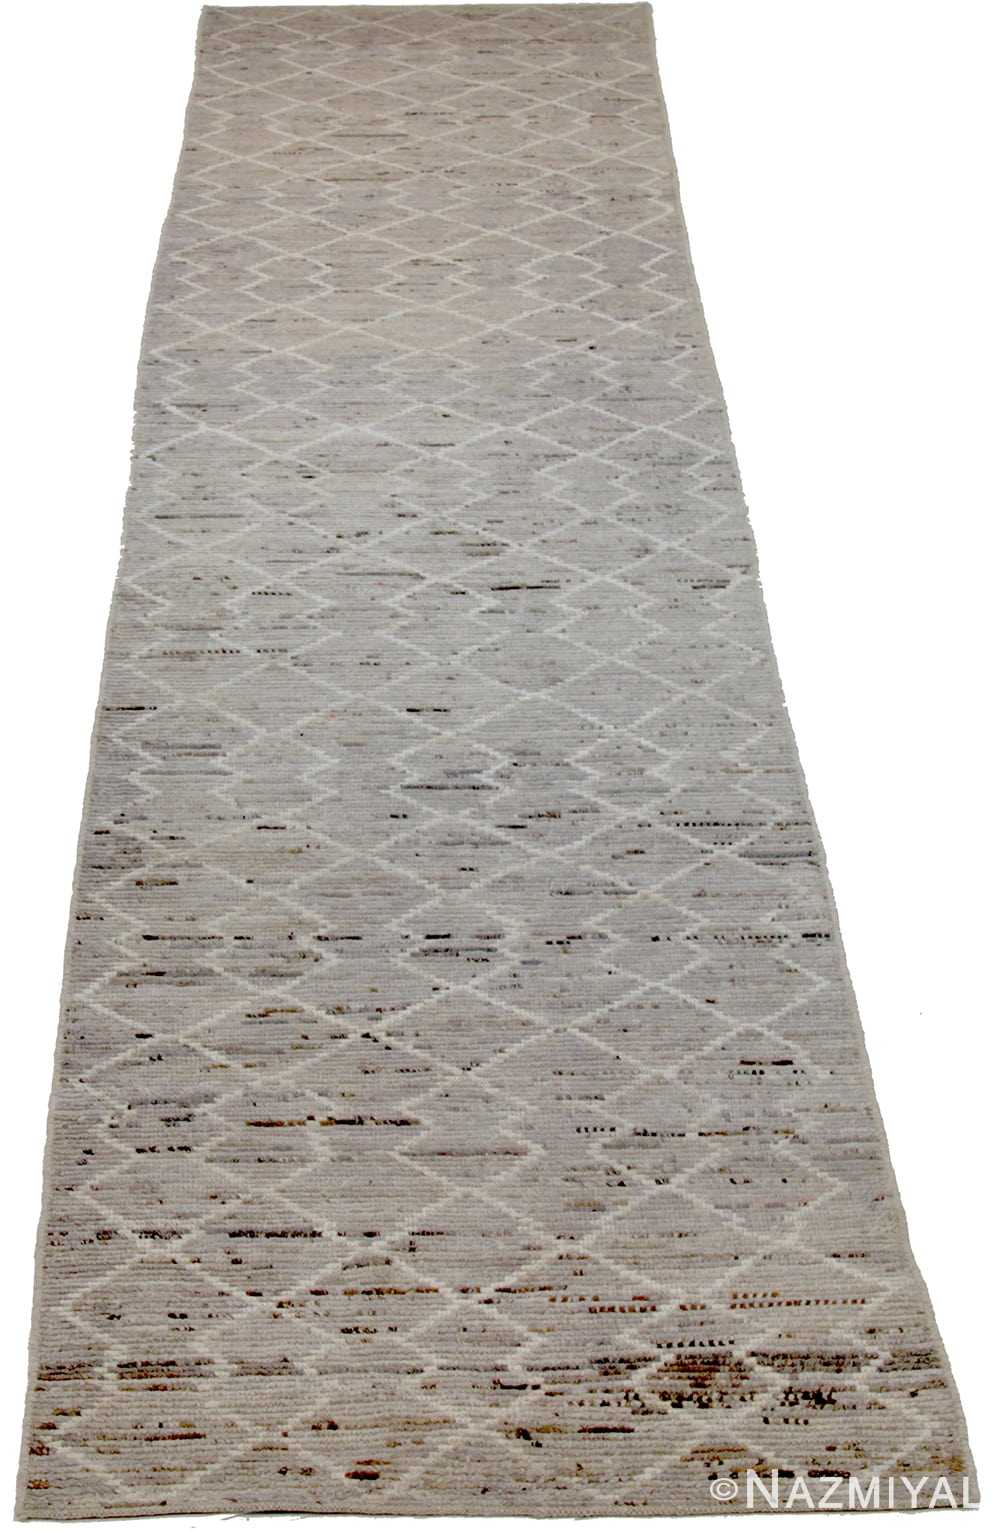 Whole View Of Beige Tribal Modern Moroccan Style Afghan Runner Rug 60165 by Nazmiyal NYC